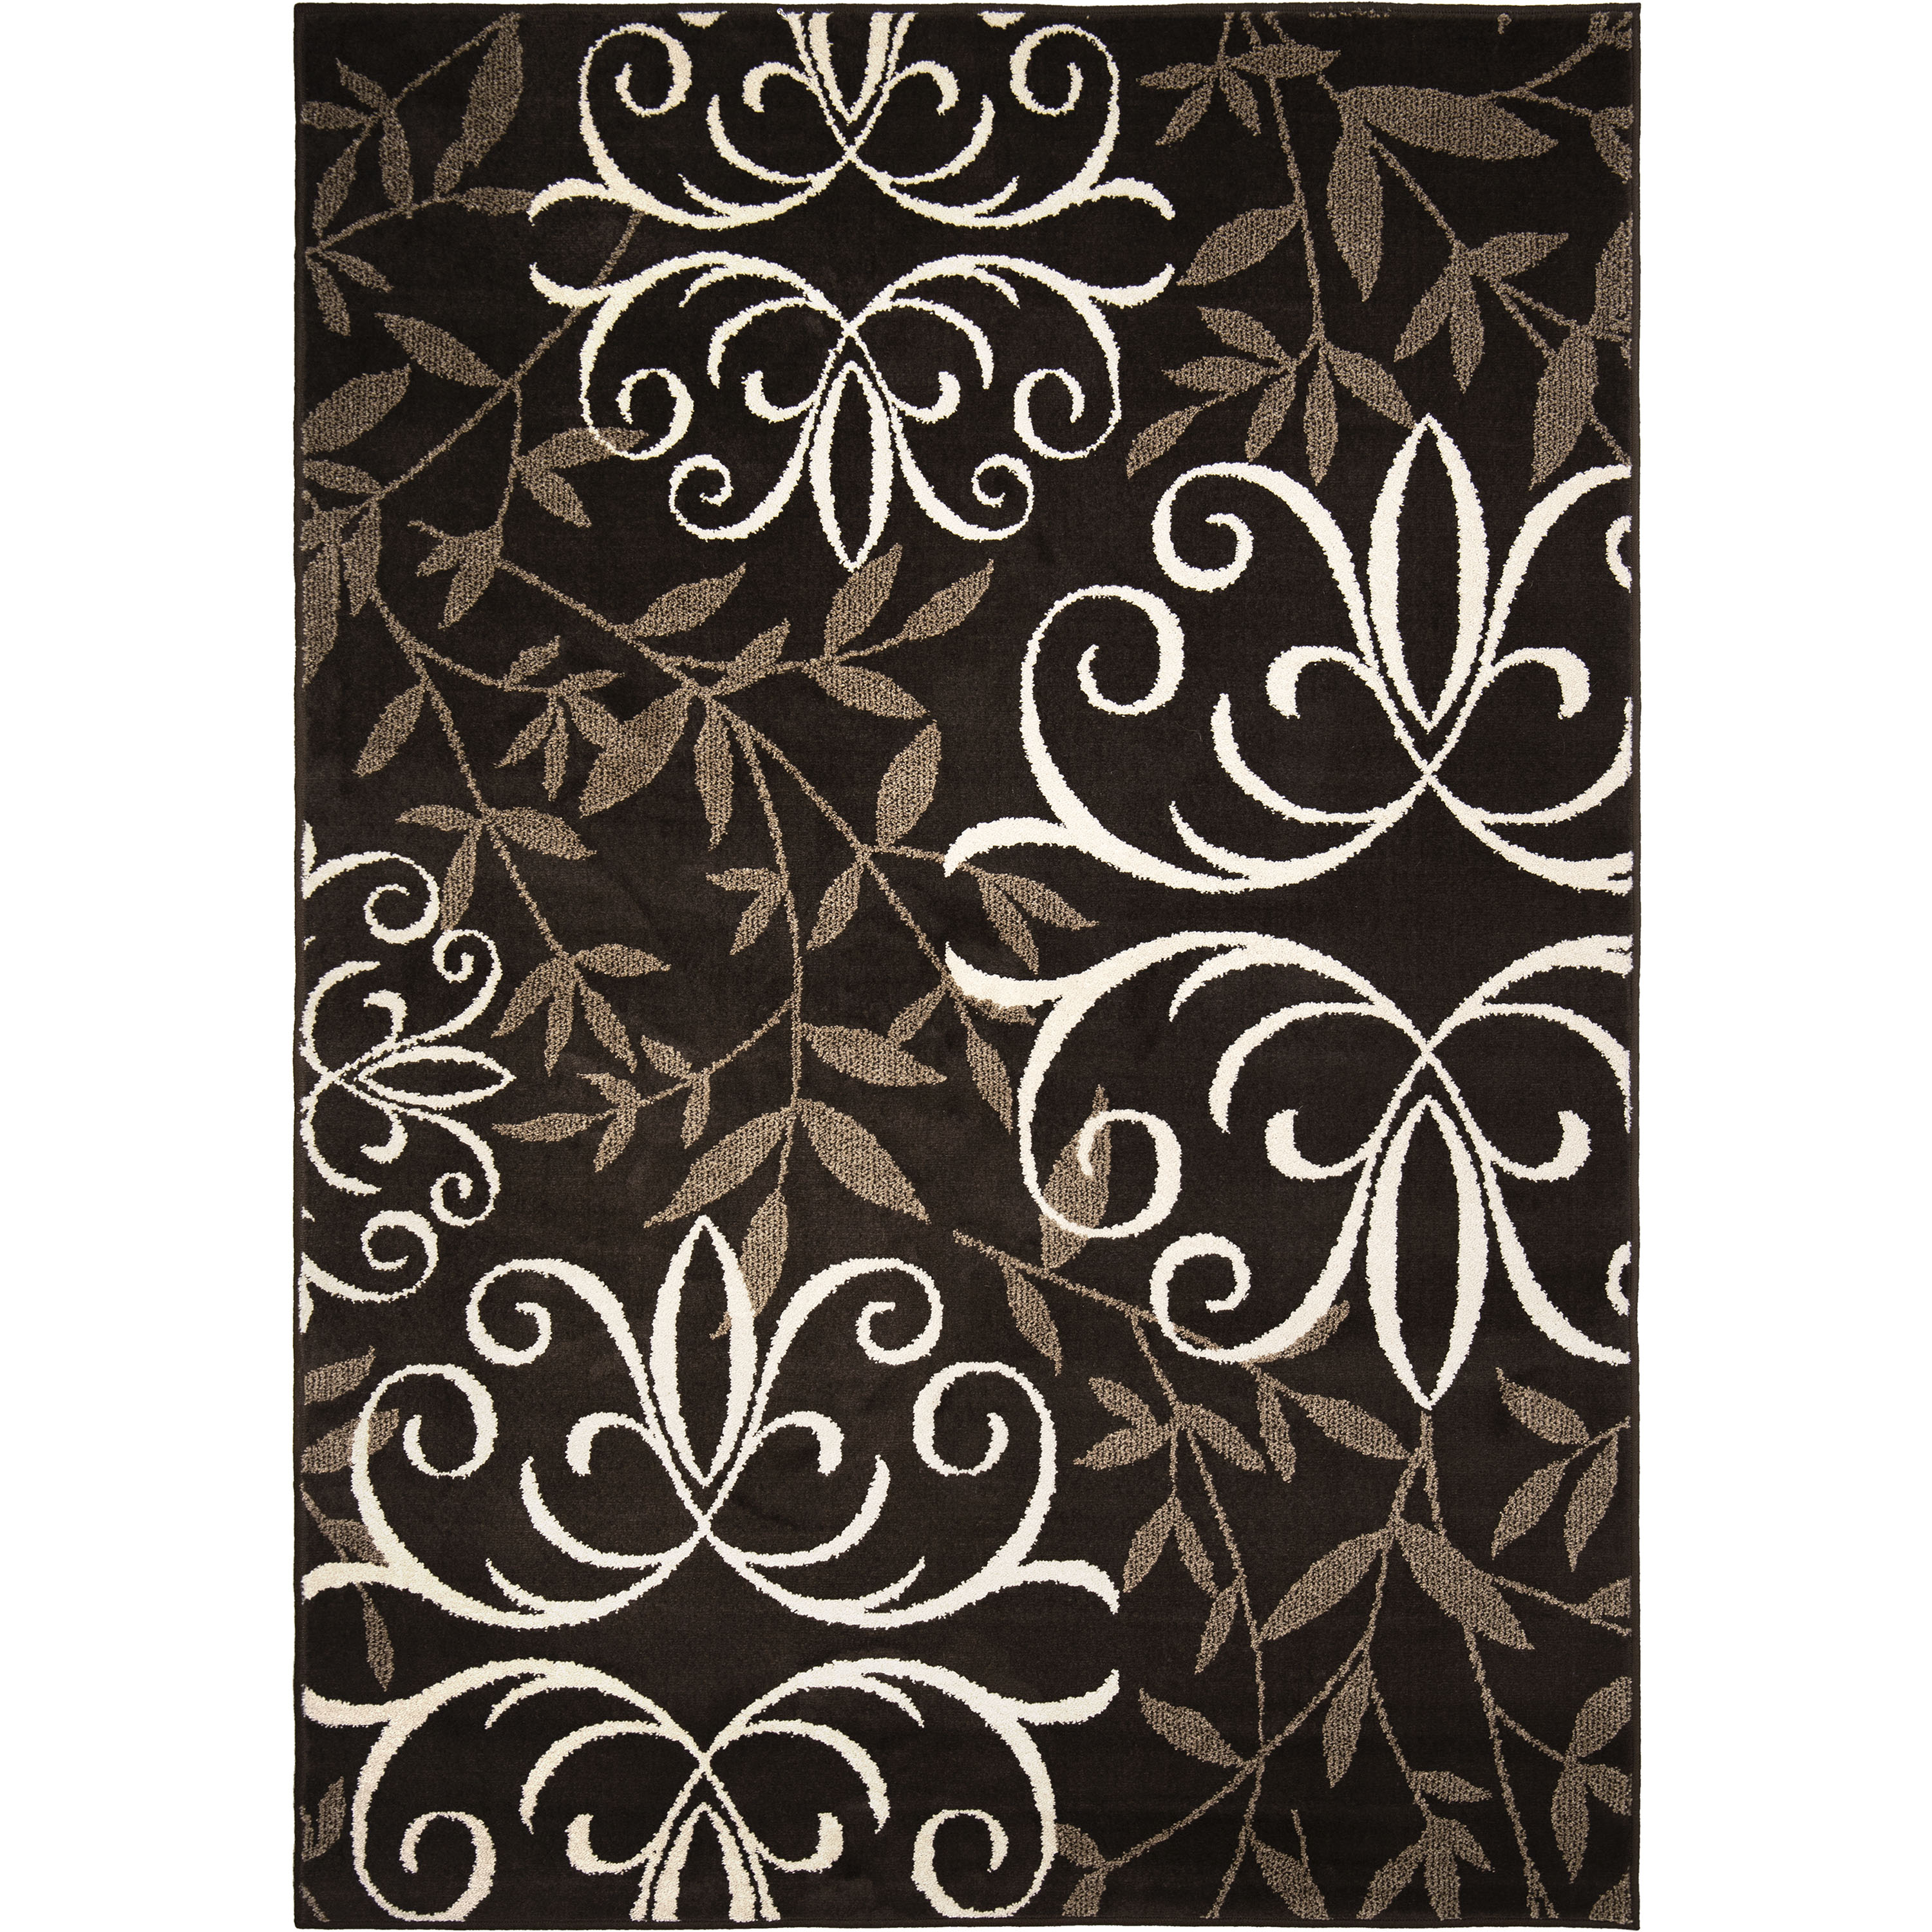 Better Homes & Gardens Iron Fleur Area Rug, Brown, 6'7" x 9'8" - image 5 of 10